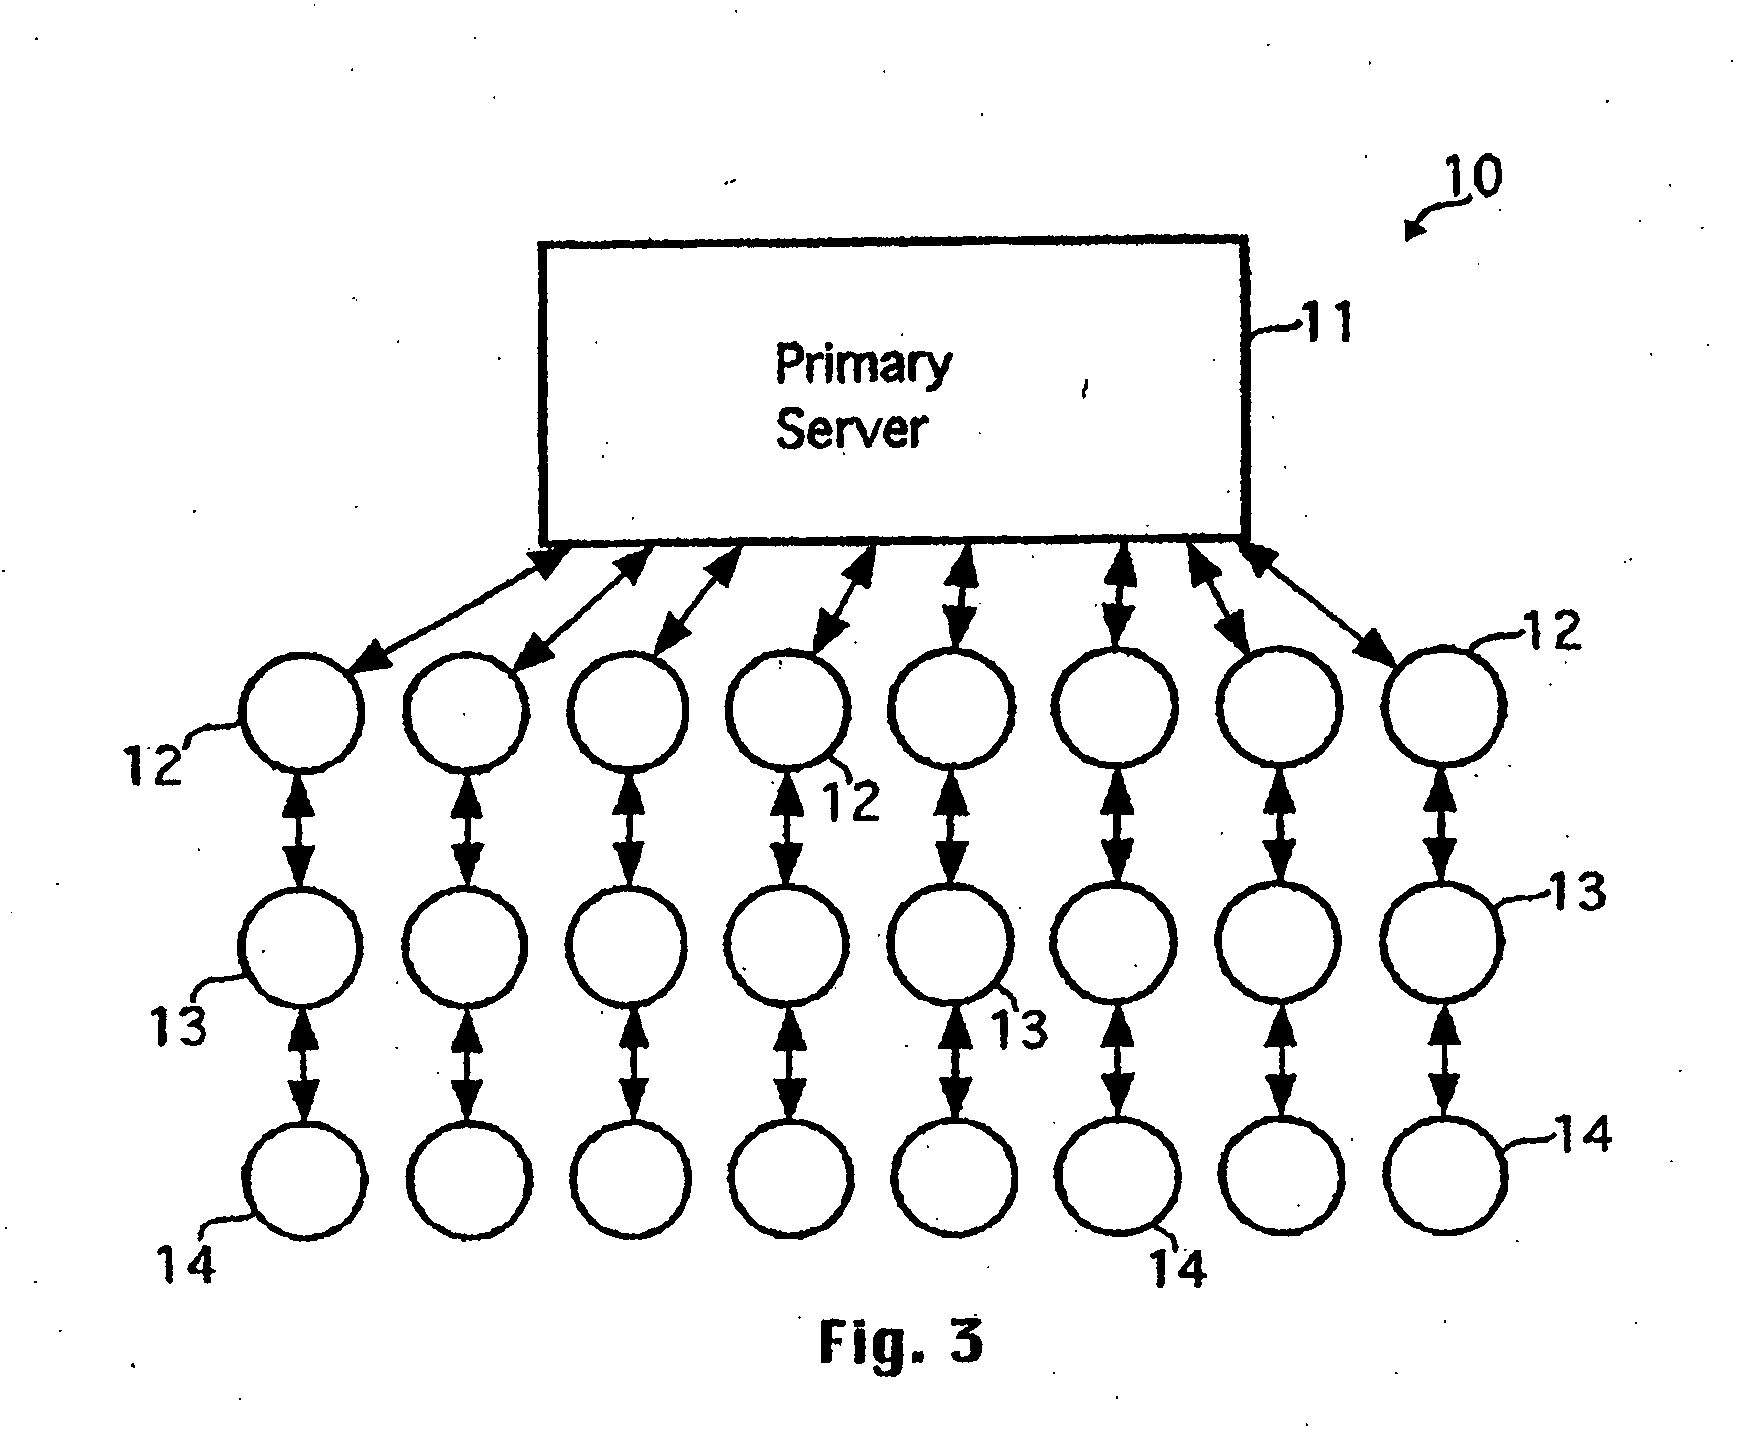 System and method for distributing data over a computer network